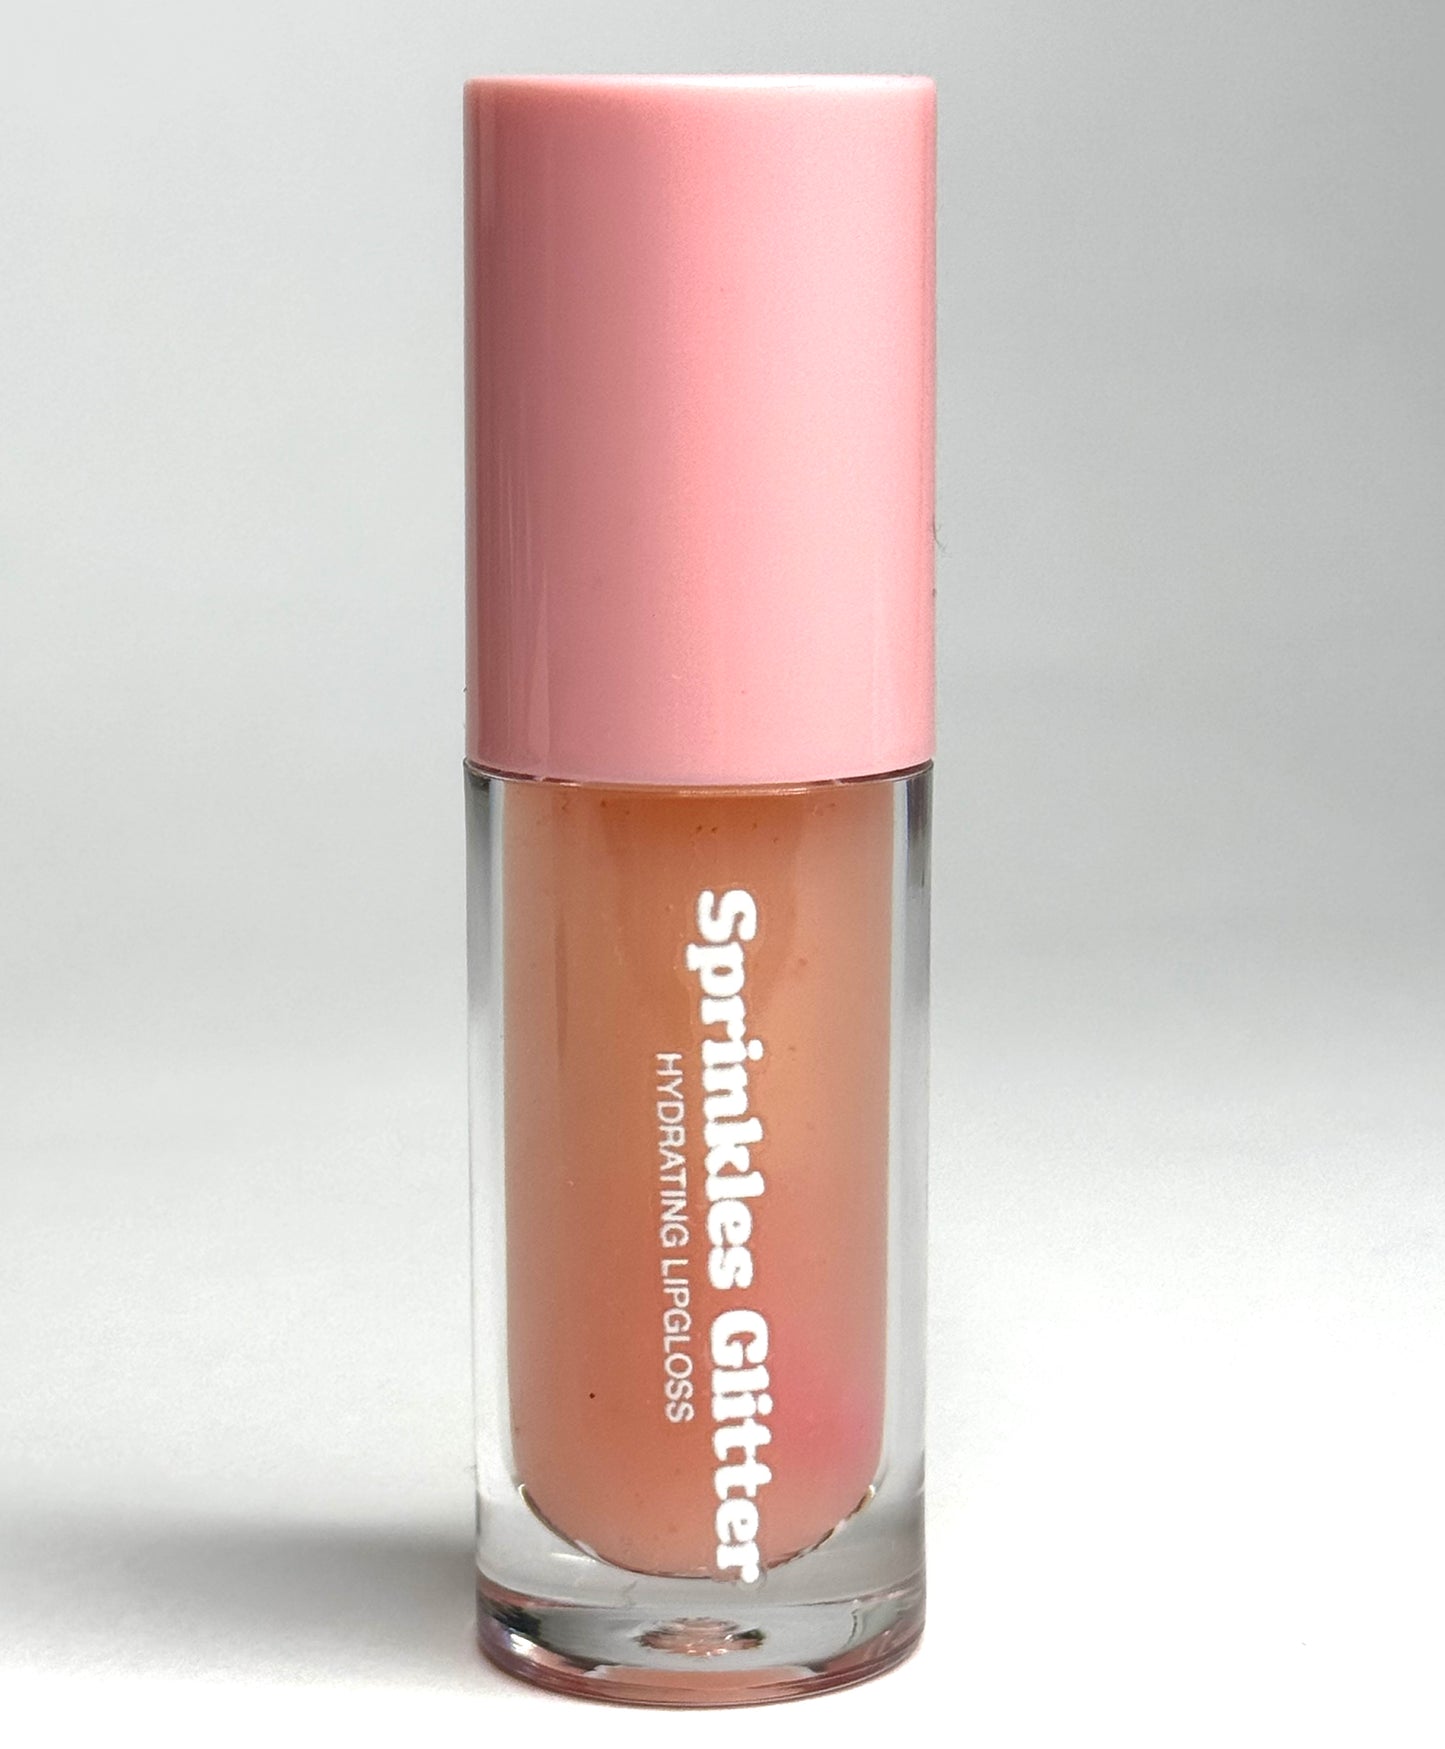 Colour changing lip gloss